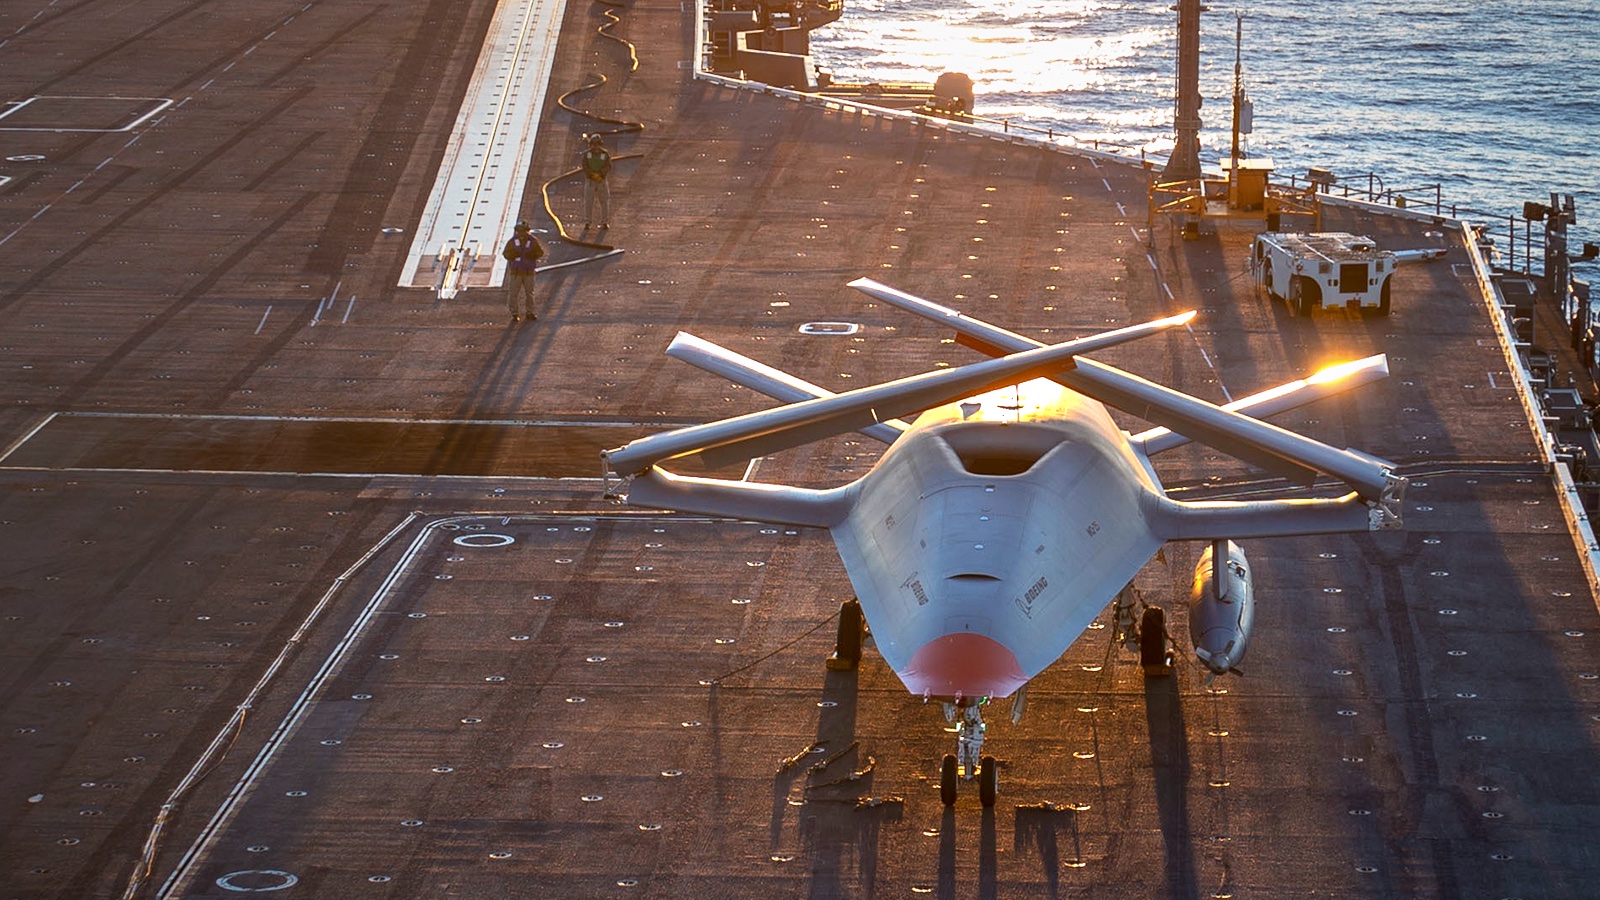 BAE Systems to Upgrade U.S. Navy's MQ-25A with Advanced Vehicle Management System